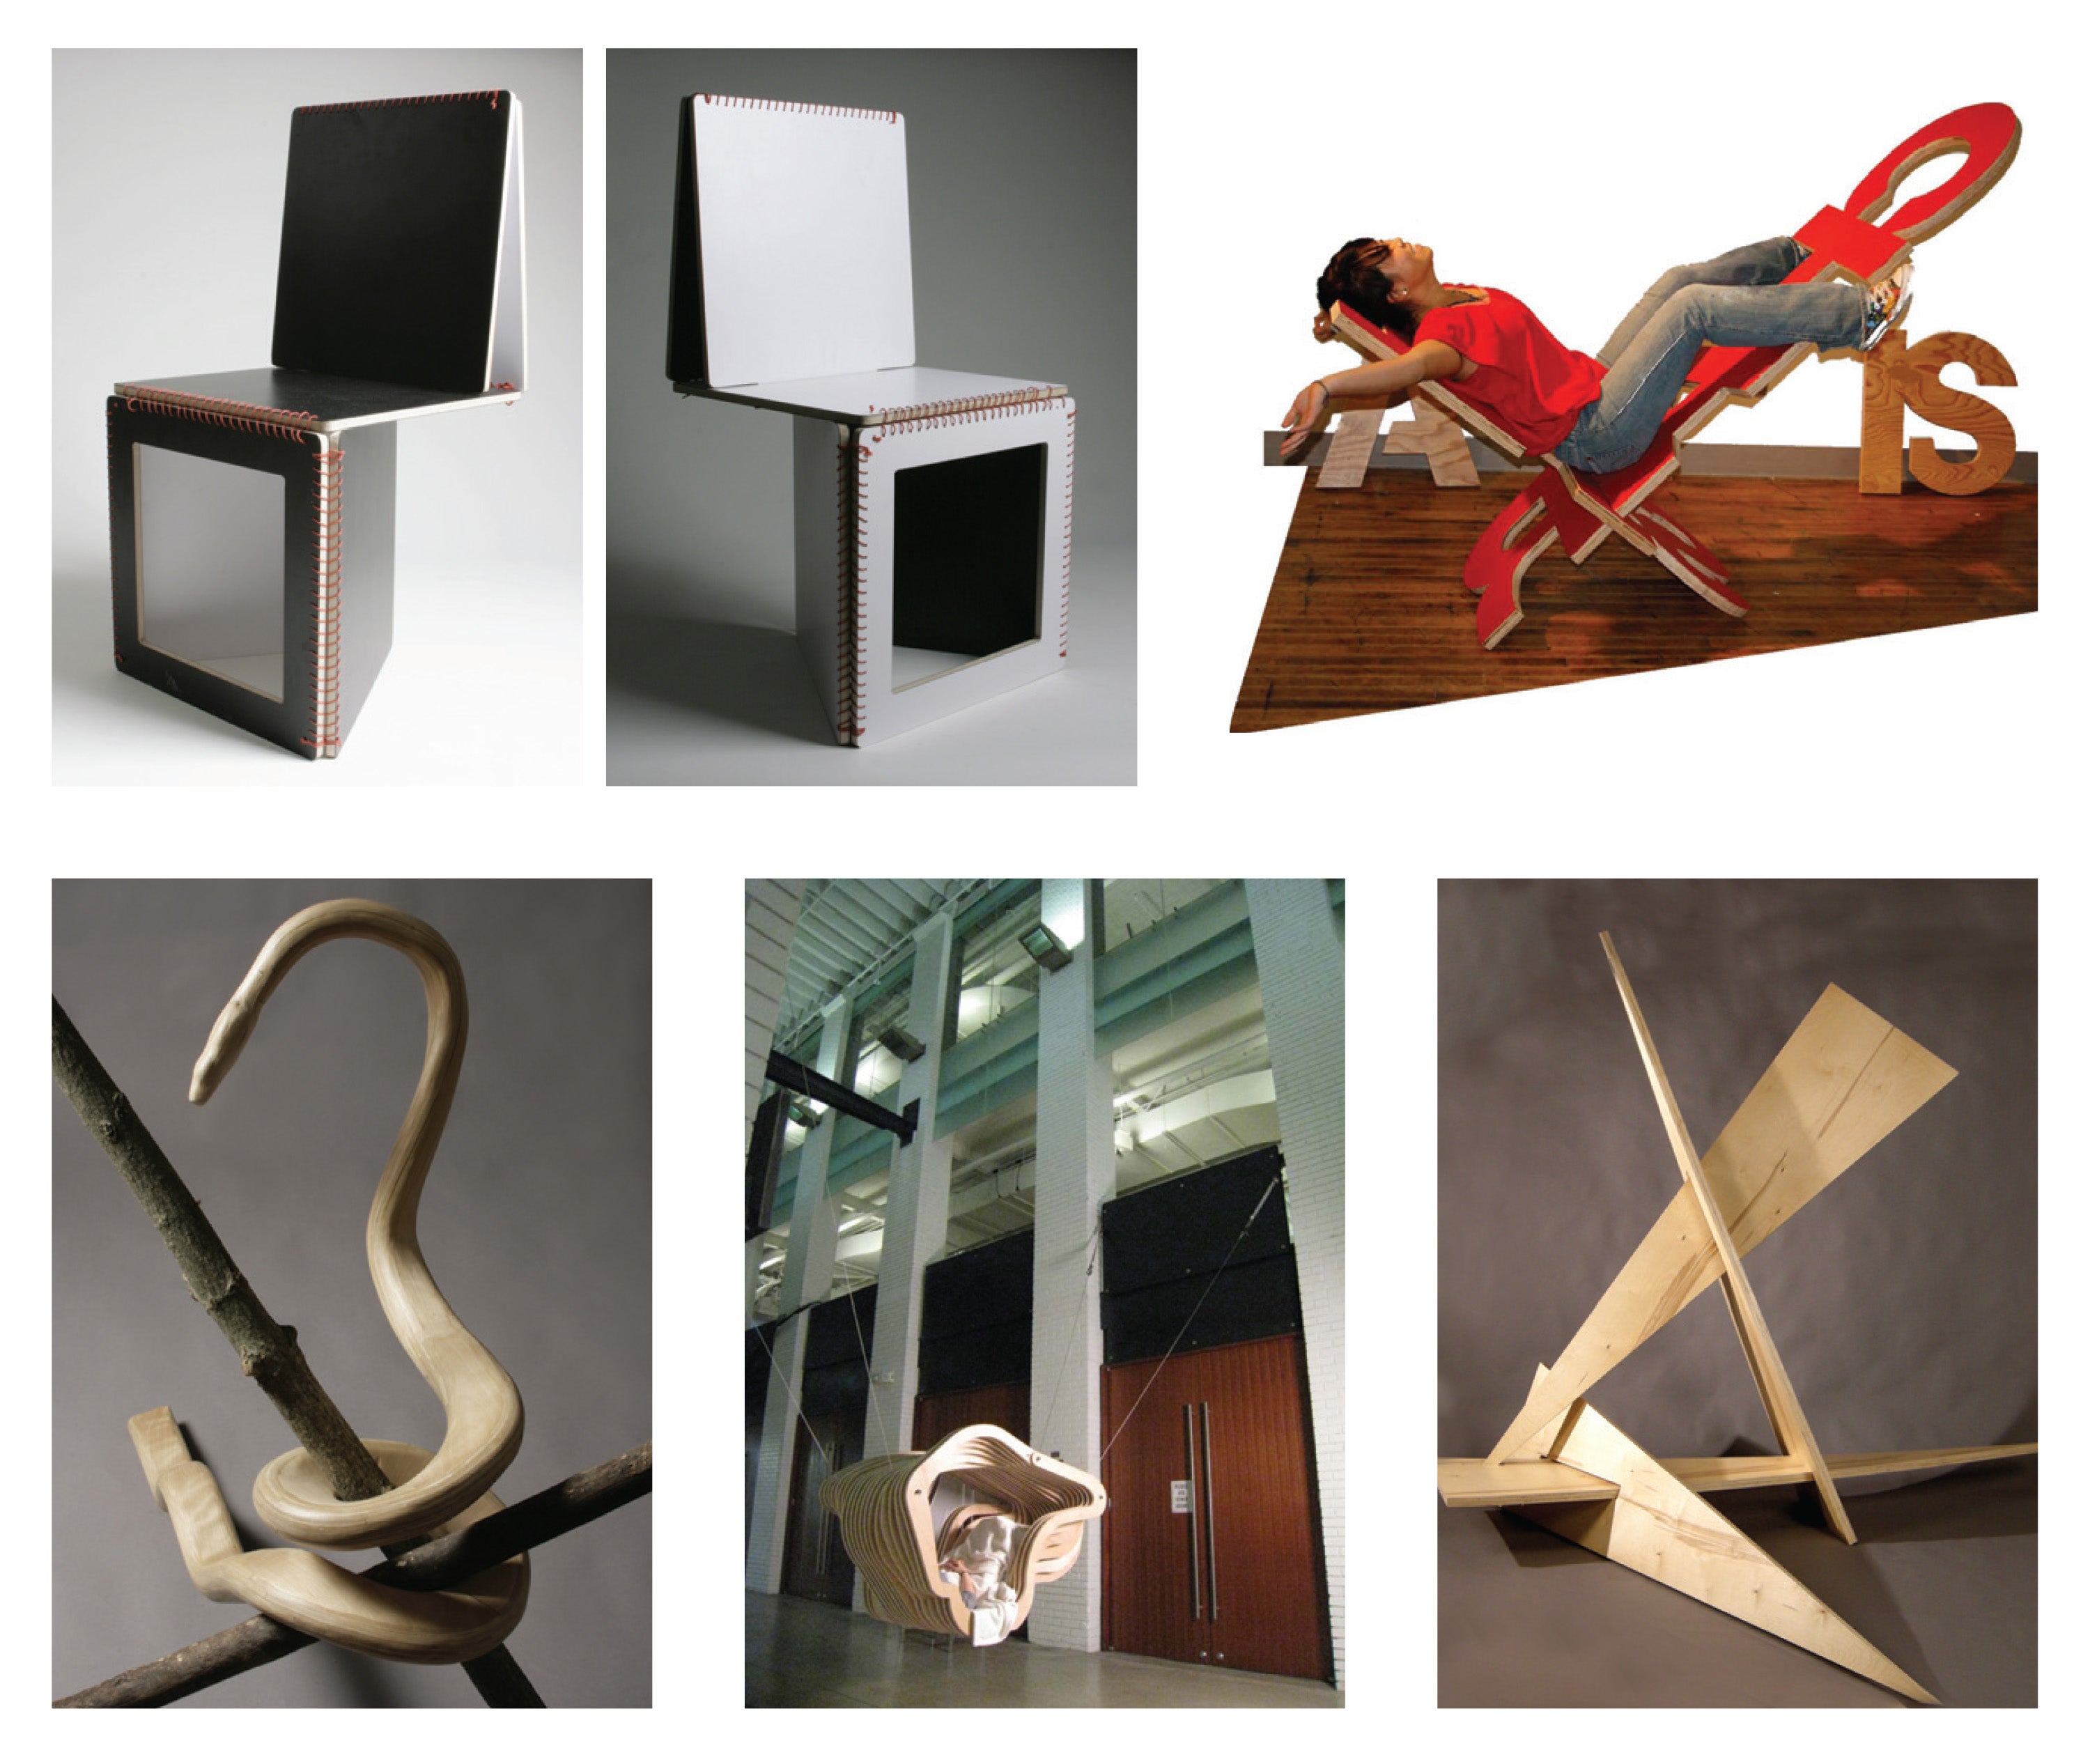 Several photographs of completed chair projects. Their designs vary from free forms to rectilinear shapes.